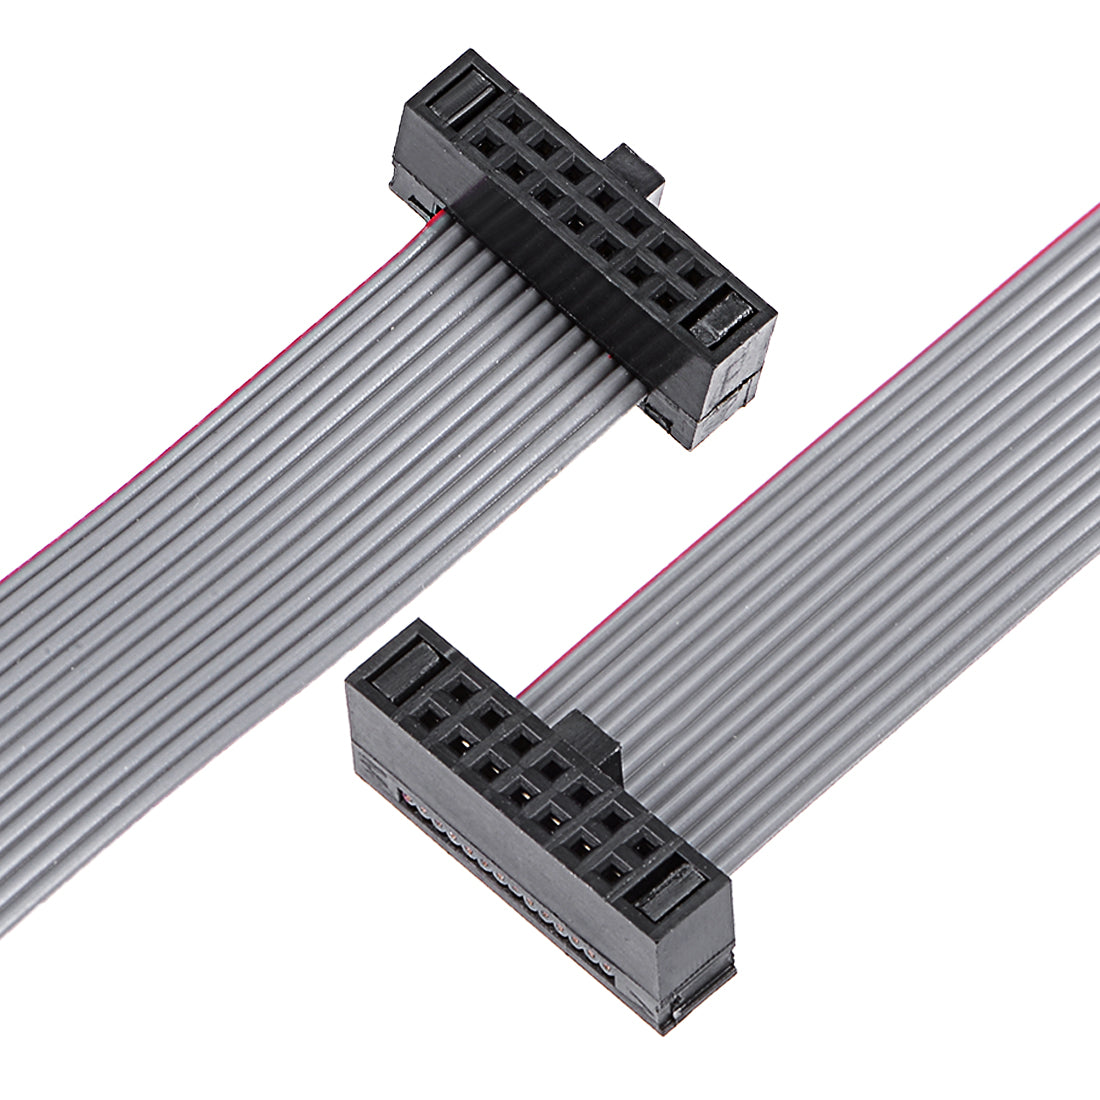 uxcell Uxcell IDC 14 Pins Connector Flat Ribbon Cable Female Connector Length 20cm 1.27mm Pitch,2pcs